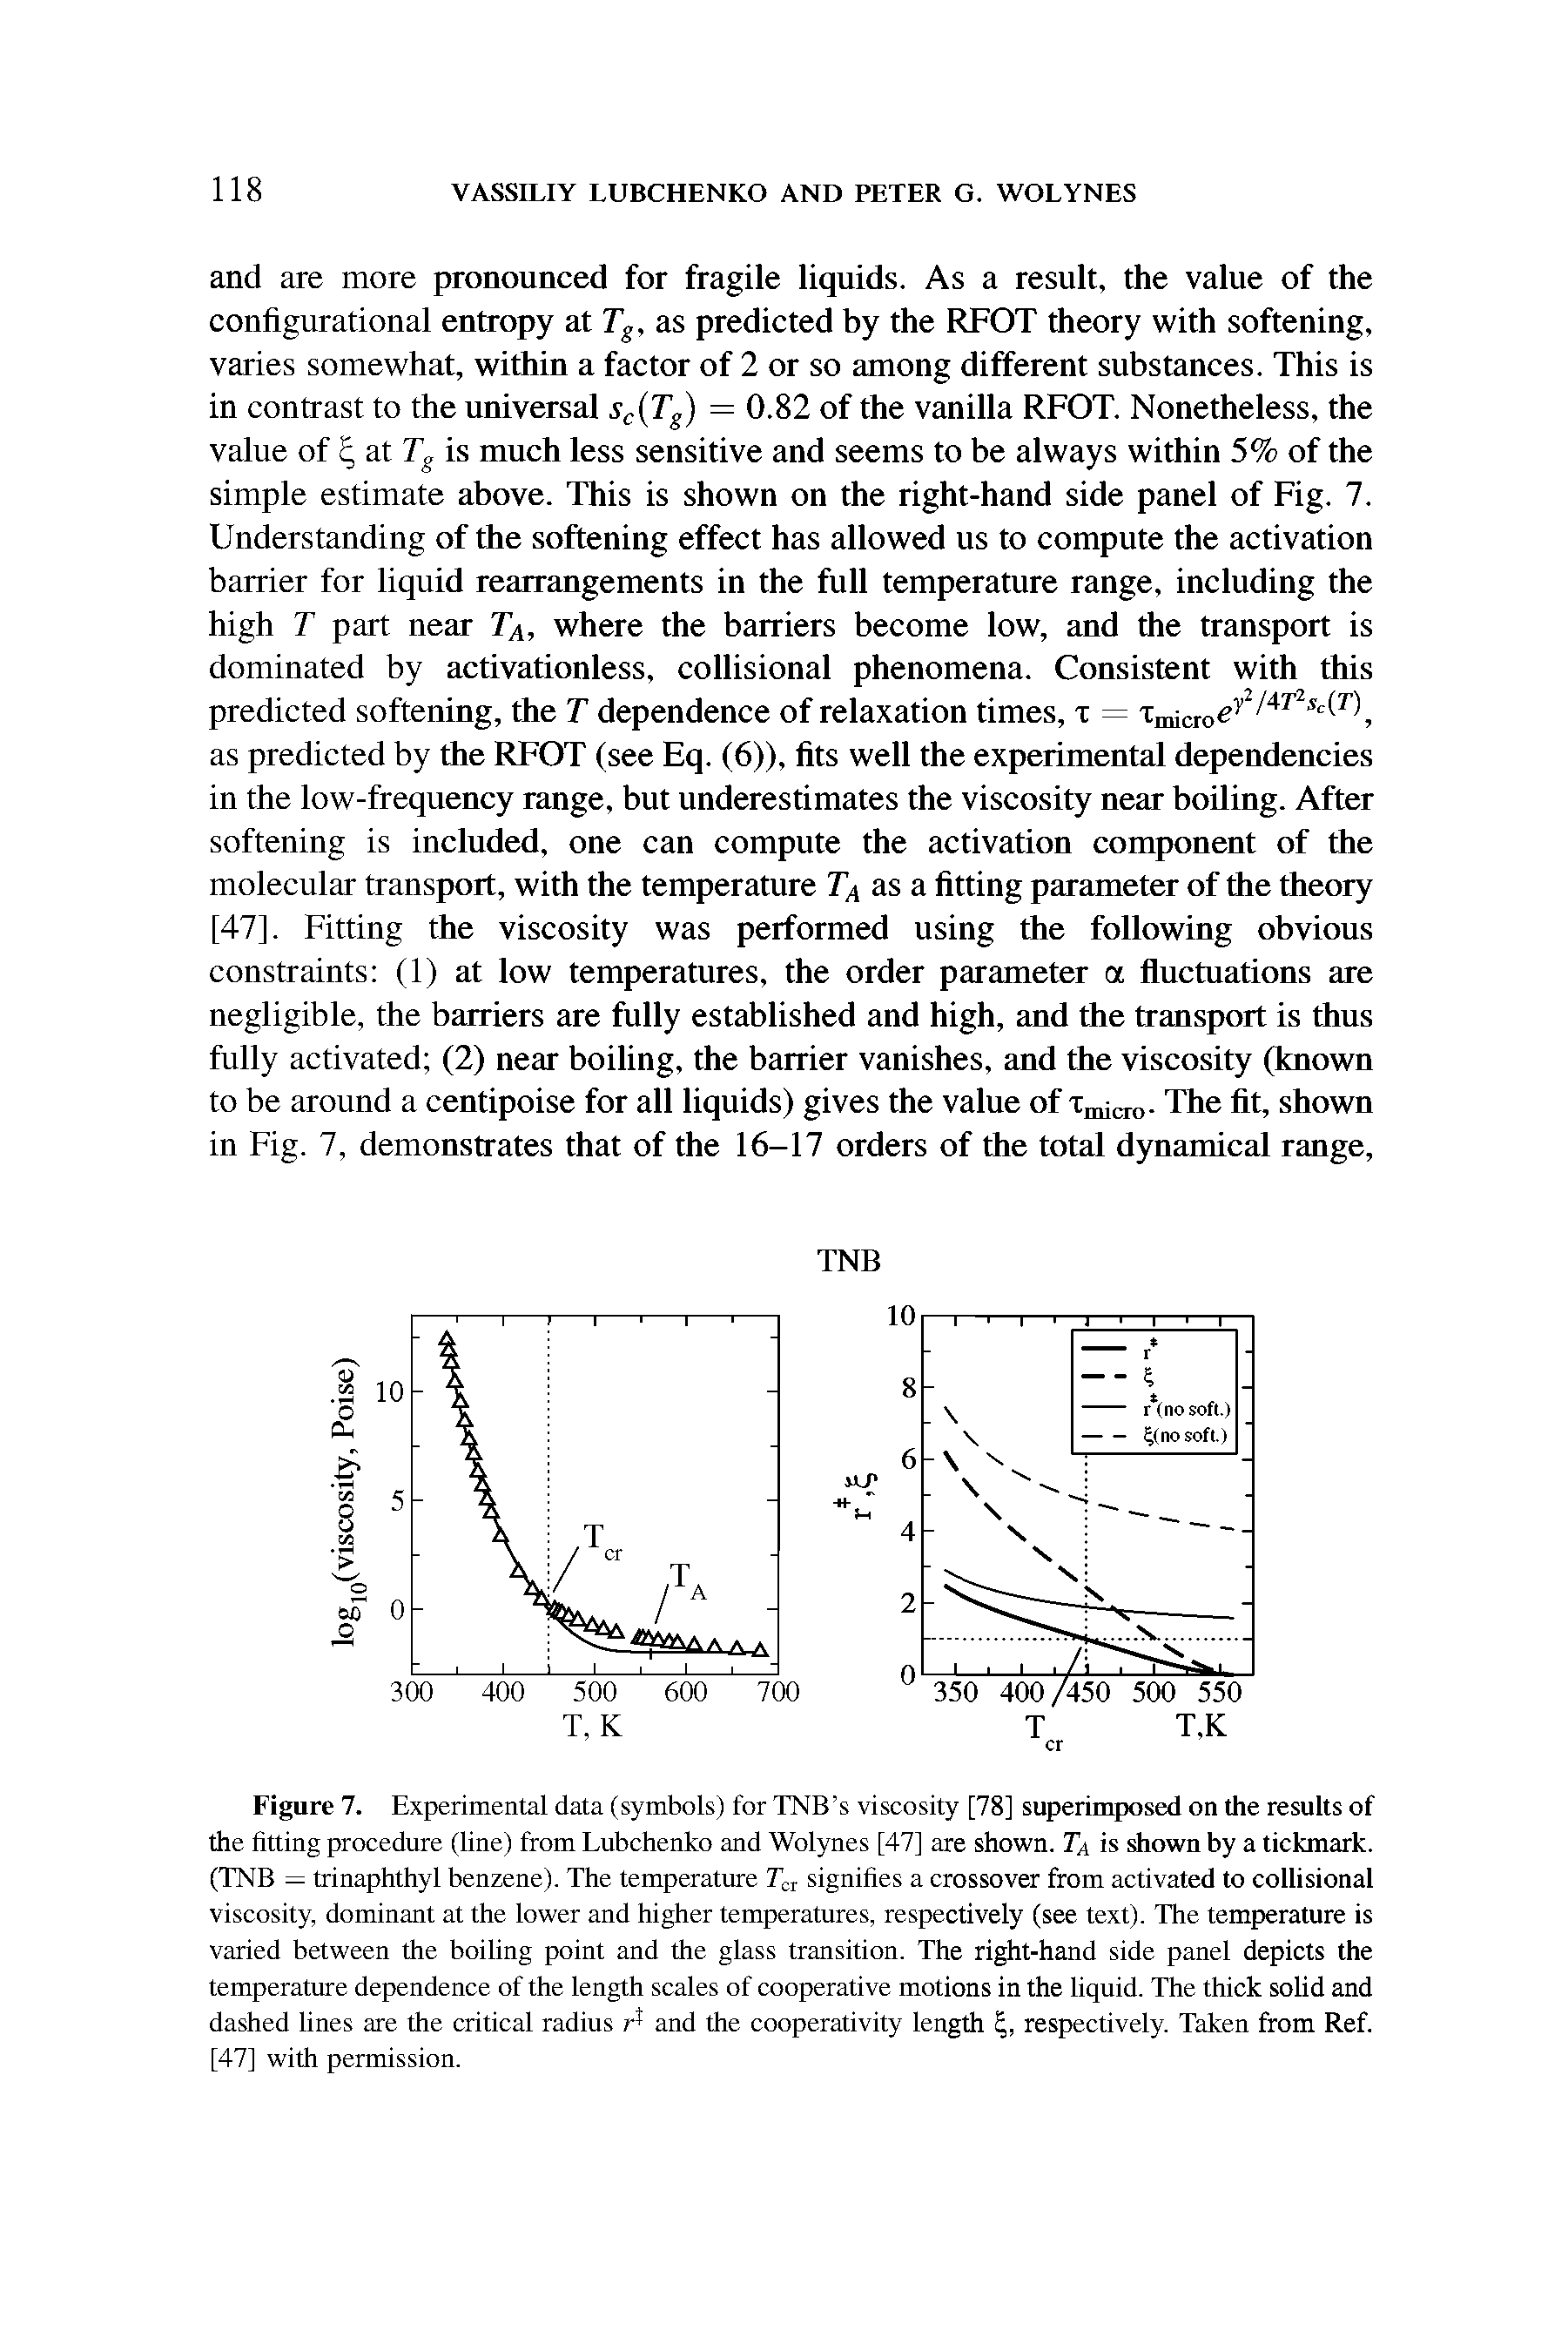 Figure 7. Experimental data (symbols) for TNB s viscosity [78] superimposed on the results of the fitting procedure (line) from Lubchenko and Wolynes [47] are shown. Ta is diown by a tickmark. (TNB = trinaphthyl benzene). The temperature Ter signifies a crossover from activated to collisional viscosity, dominant at the lower and higher temperatures, respectively (see text). The temperature is varied between the boiling point and the glass transition. The right-hand side panel depicts the temperature dependence of the length scales of cooperative motions in the liquid. The thick solid and dashed lines are the critical radius and the cooperativity length respectively. Taken from Ref. [47] with permission.